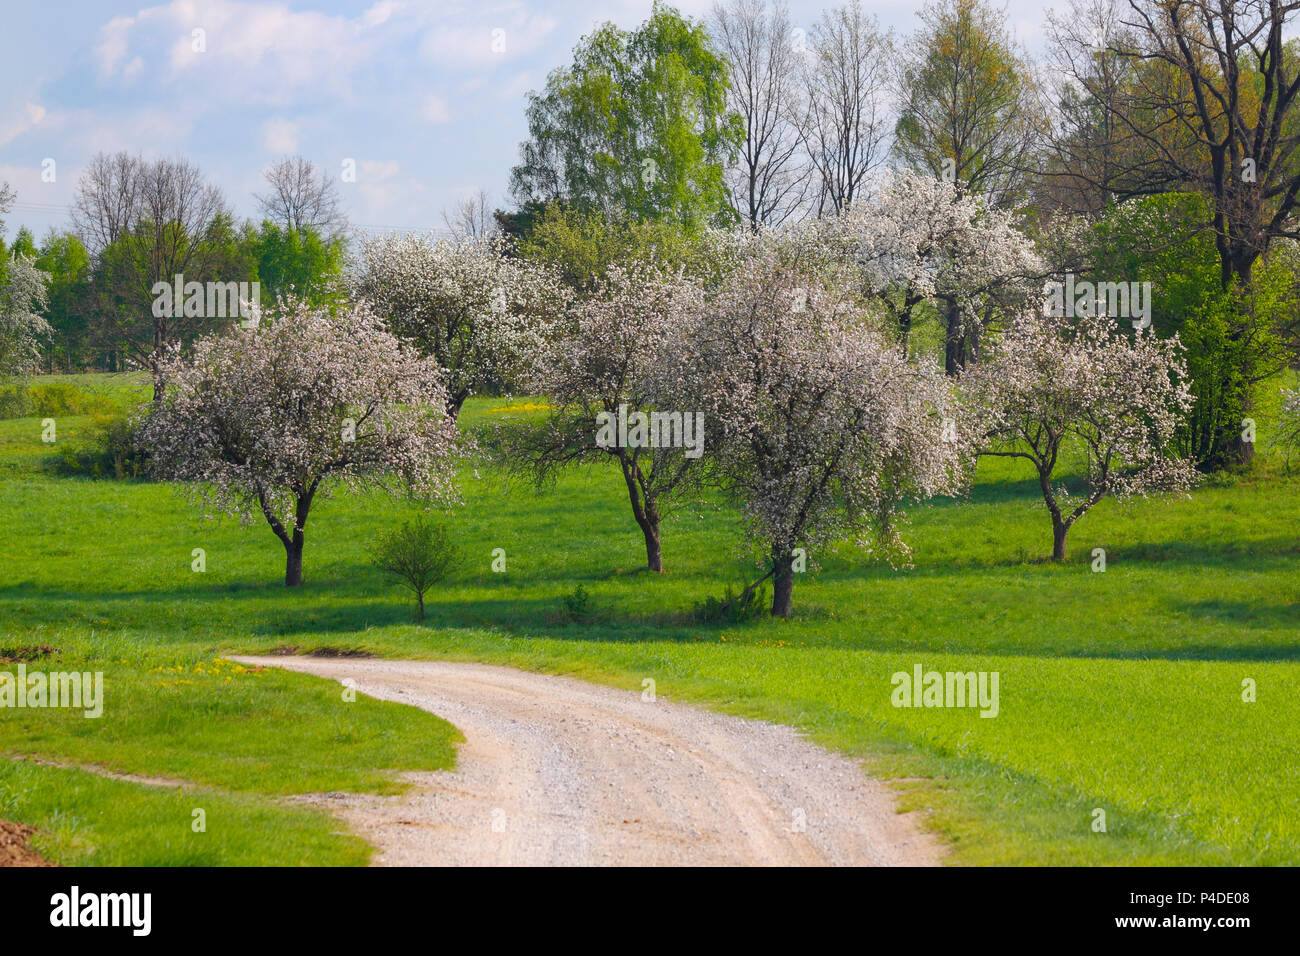 Spring landscape with flowering trees and dusty road. Poland, The Holy Cross Mountains. Stock Photo